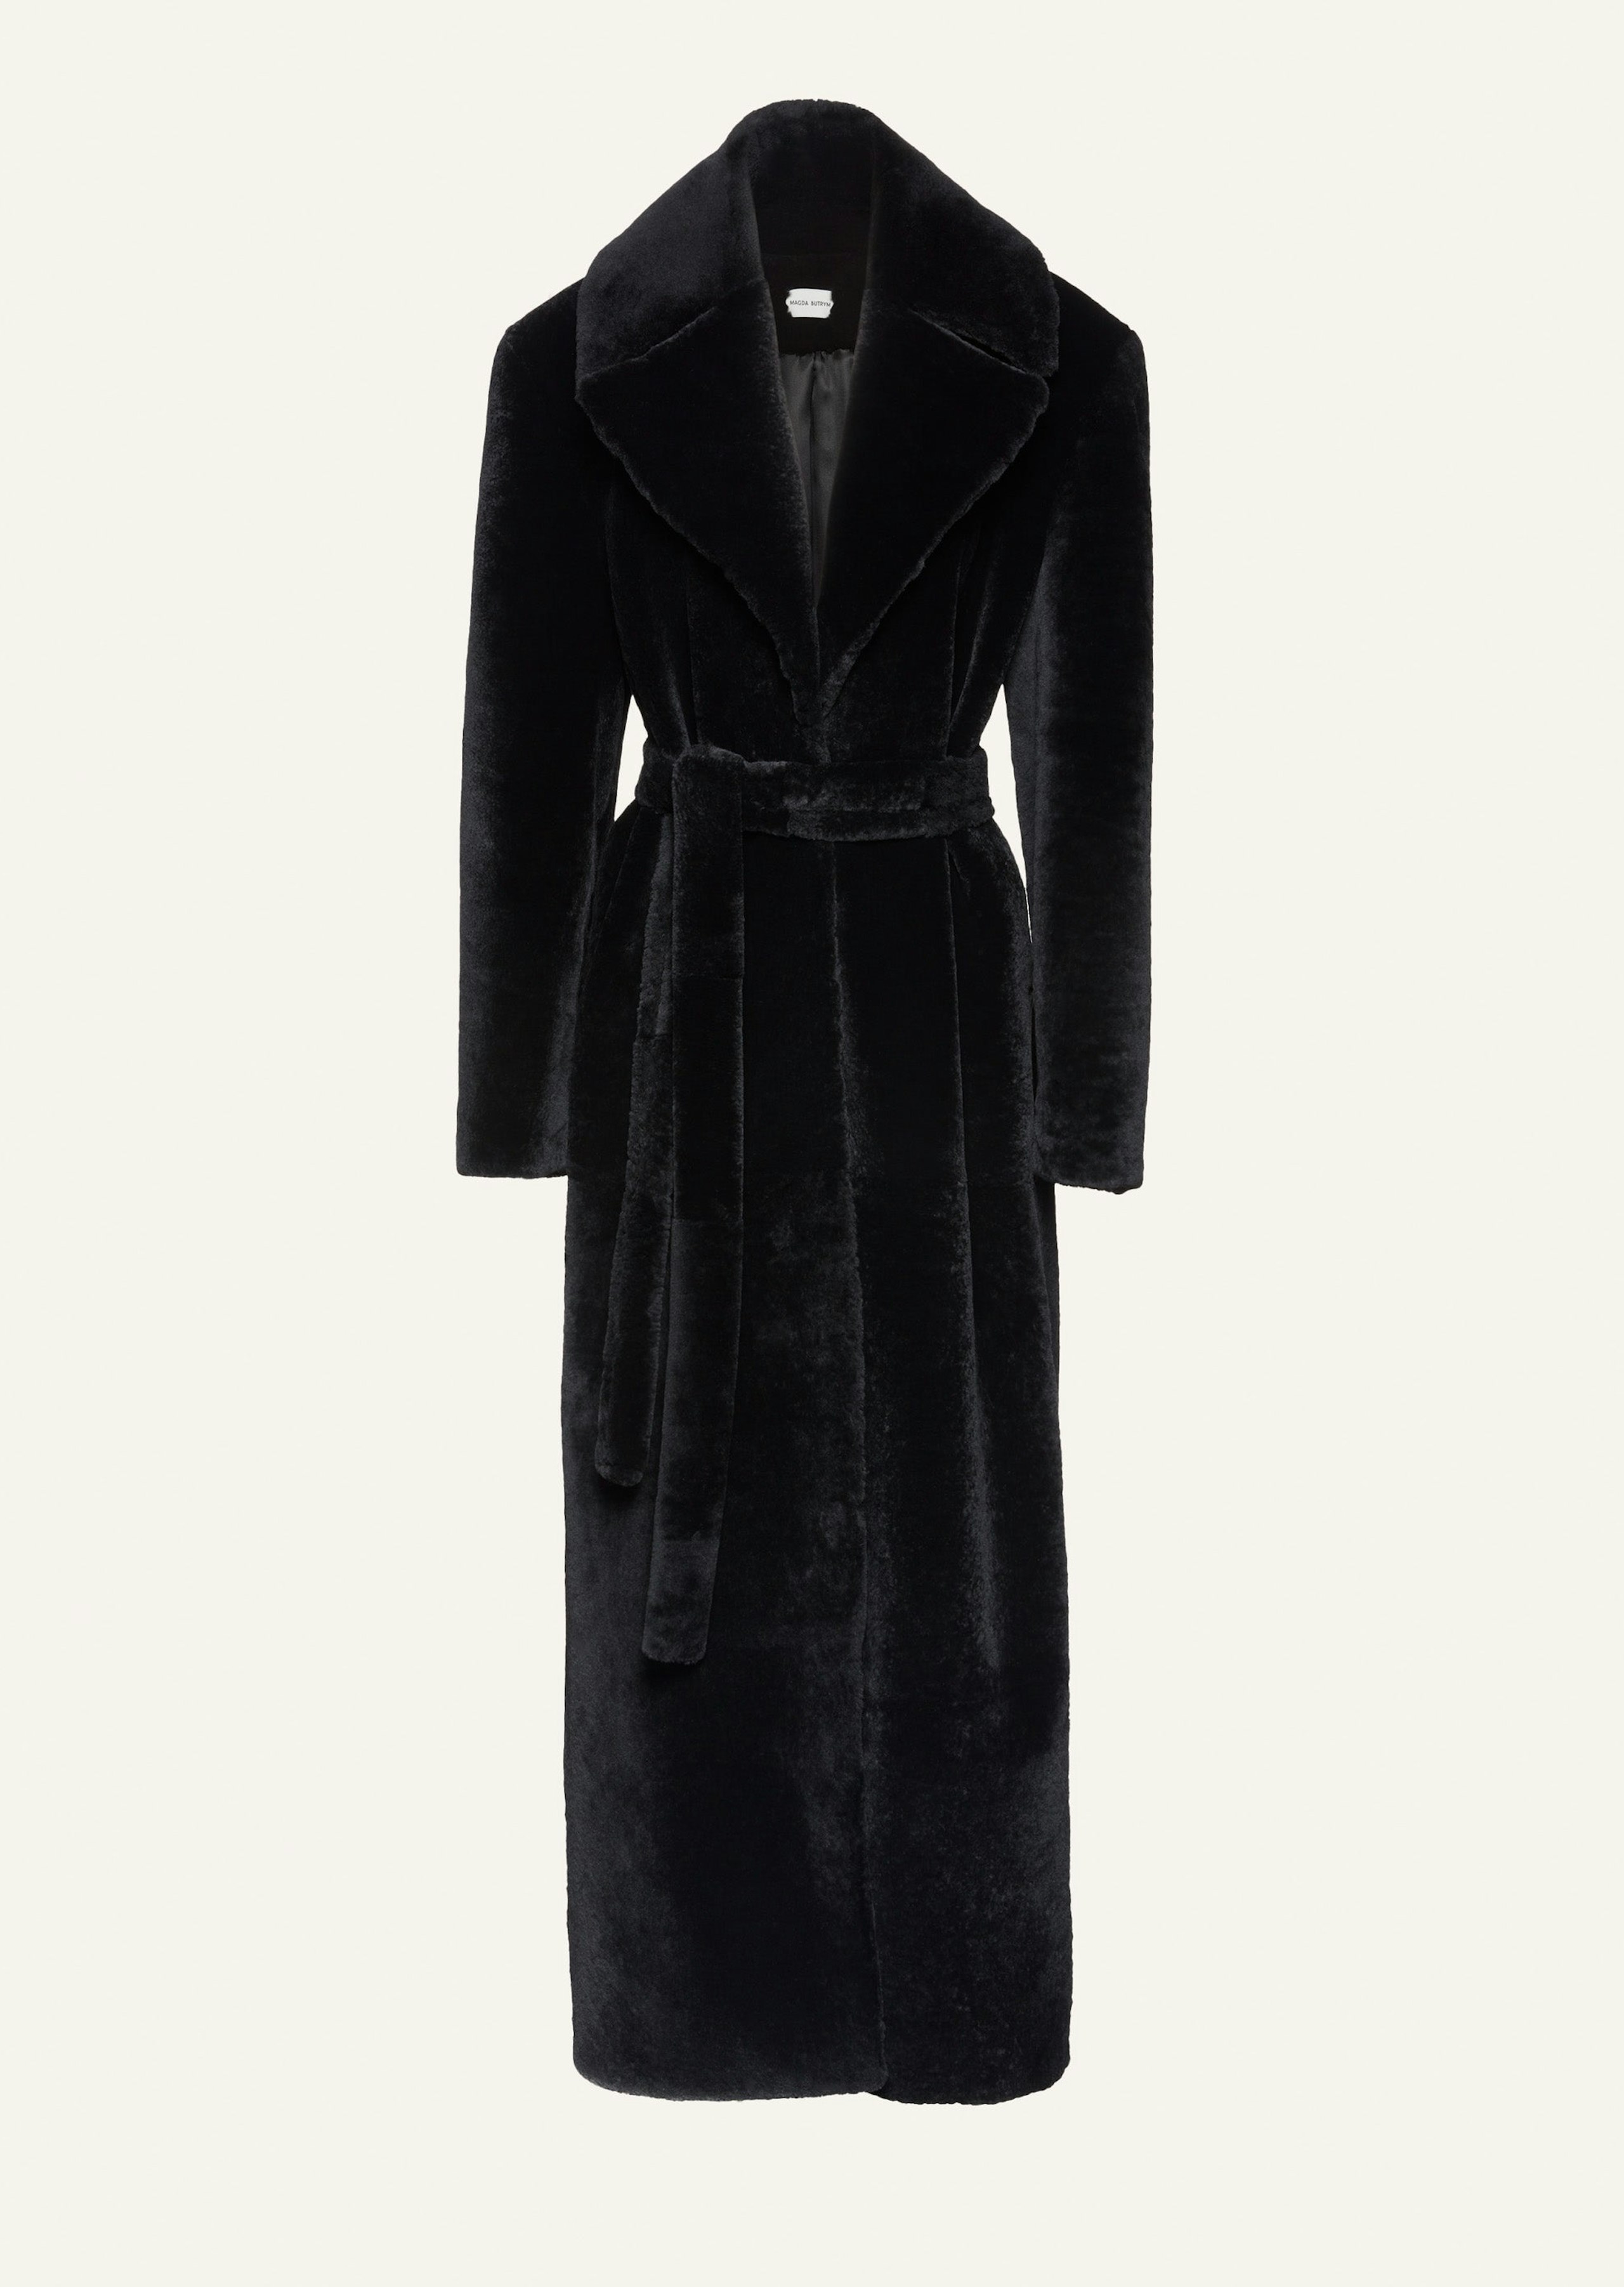 AW23 LEATHER 16 SHEARLING COAT BLACK